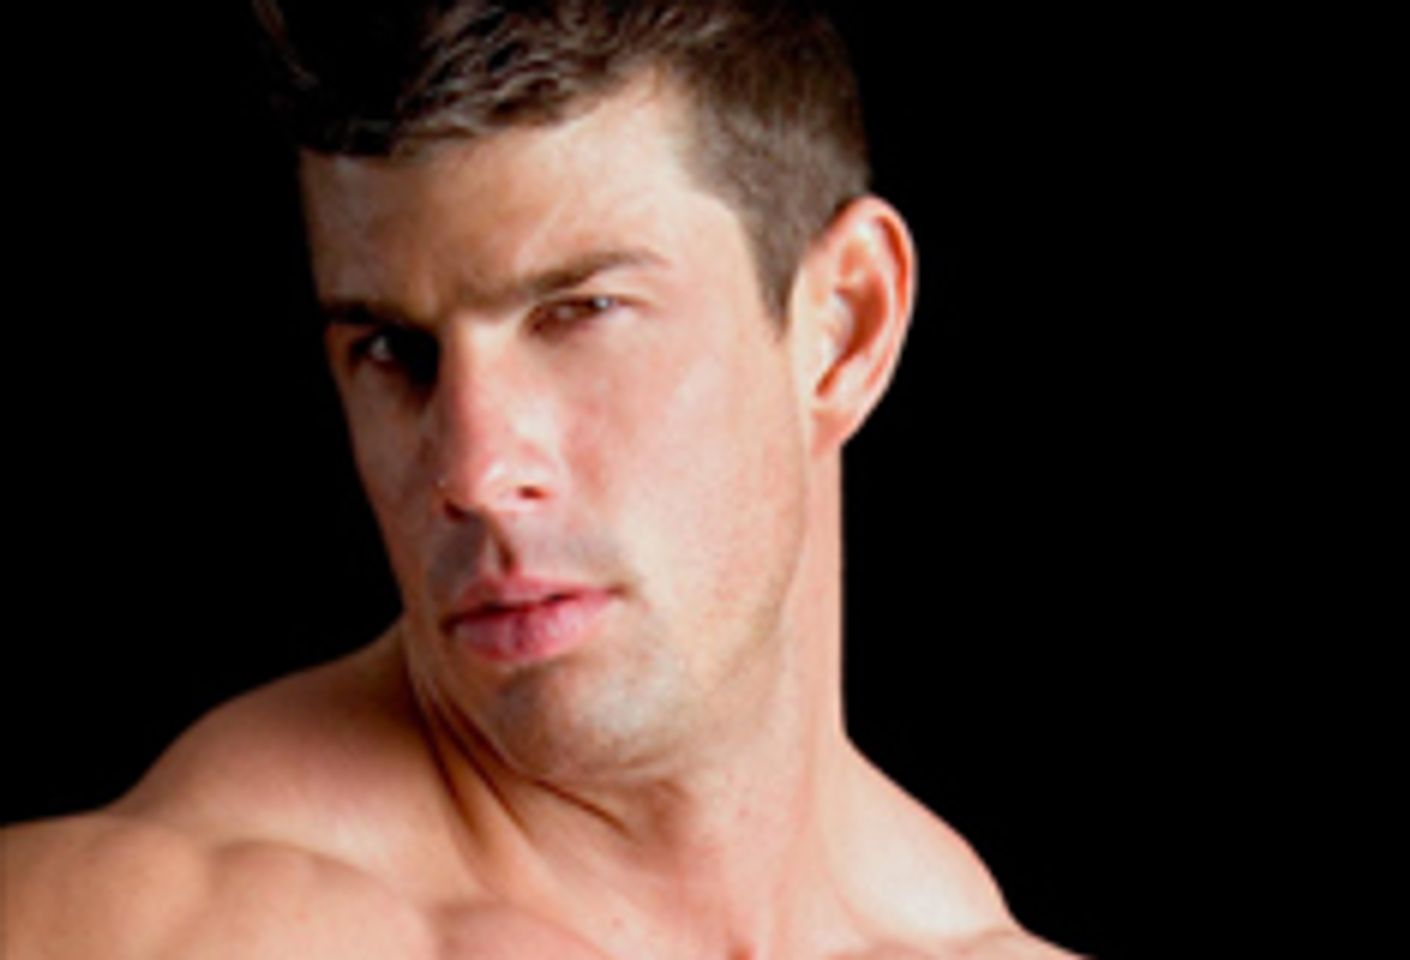 Zeb Atlas to Get First On-Camera Gay Blowjob